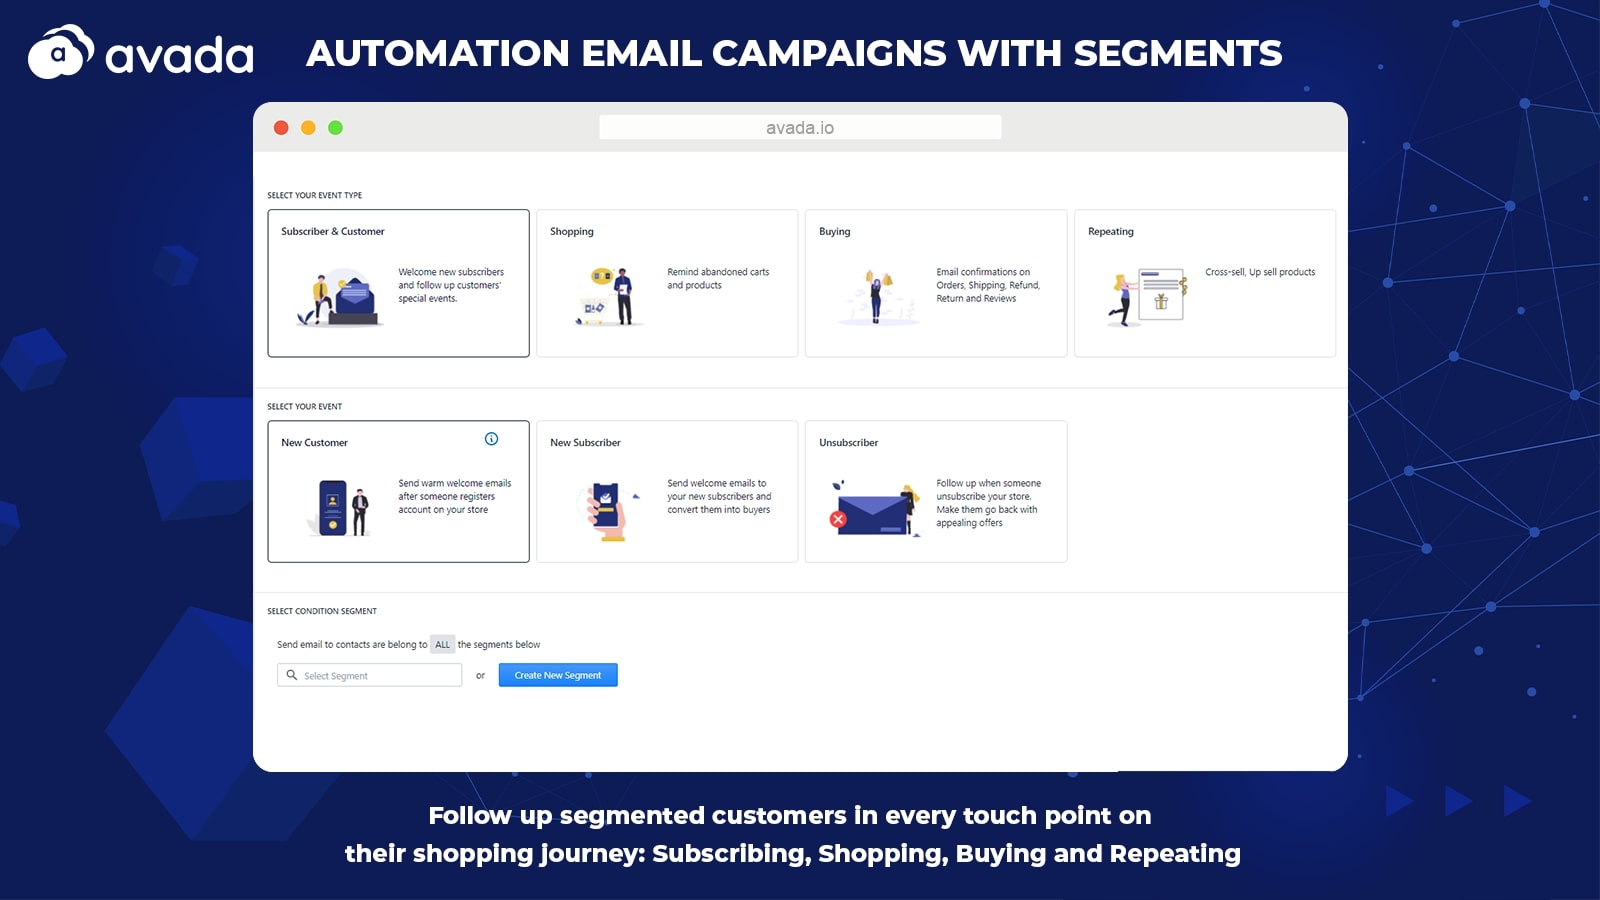 AVADA Email Marketing - Email automation